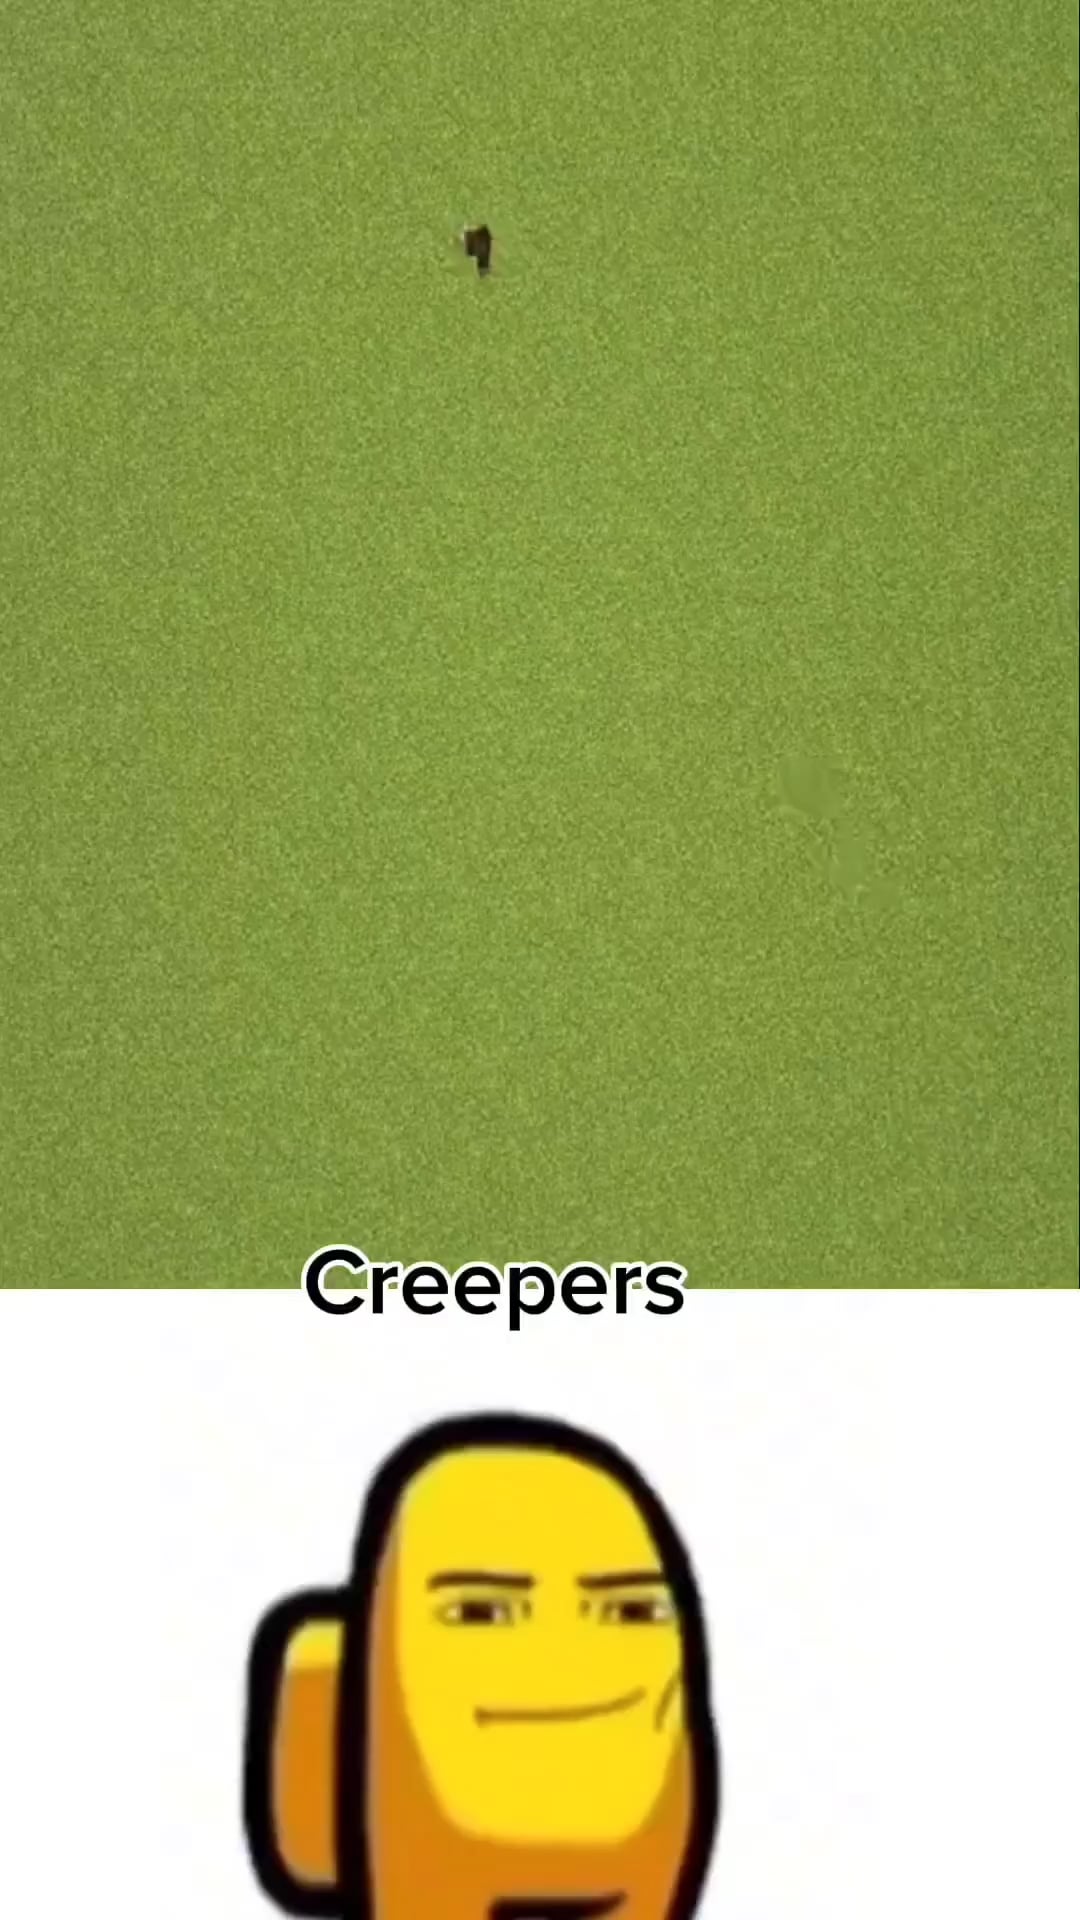 Minecraft Memes - Creepers be like: Sizzle and Boom